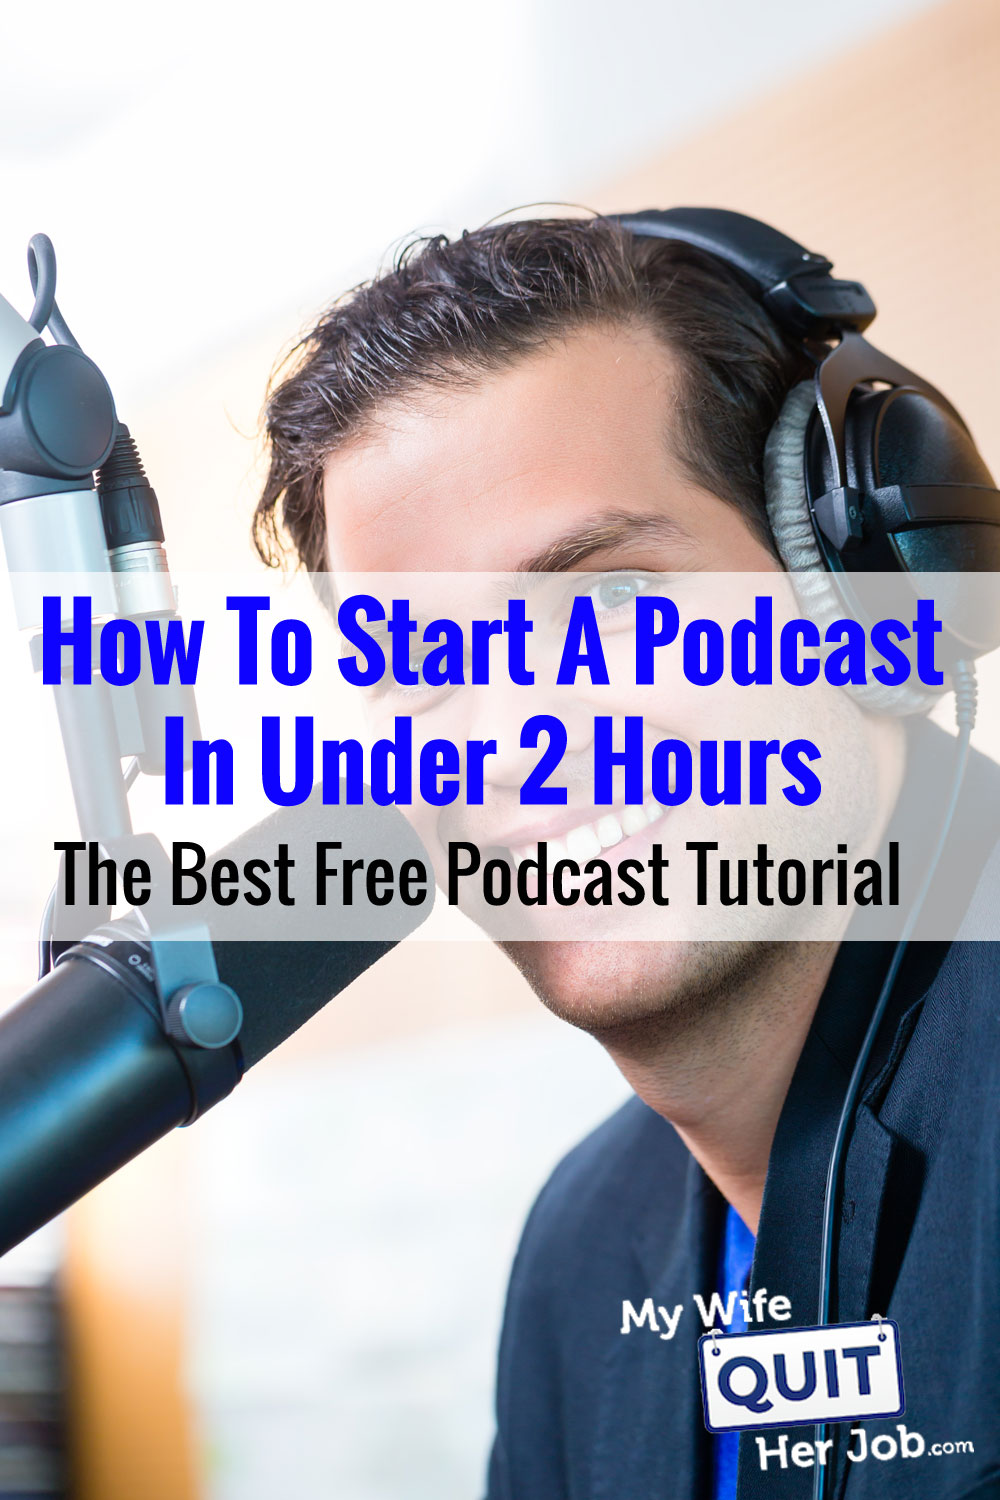 How To Start A Podcast In Under 2 Hours - The Best FREE Podcast Tutorial Available ...